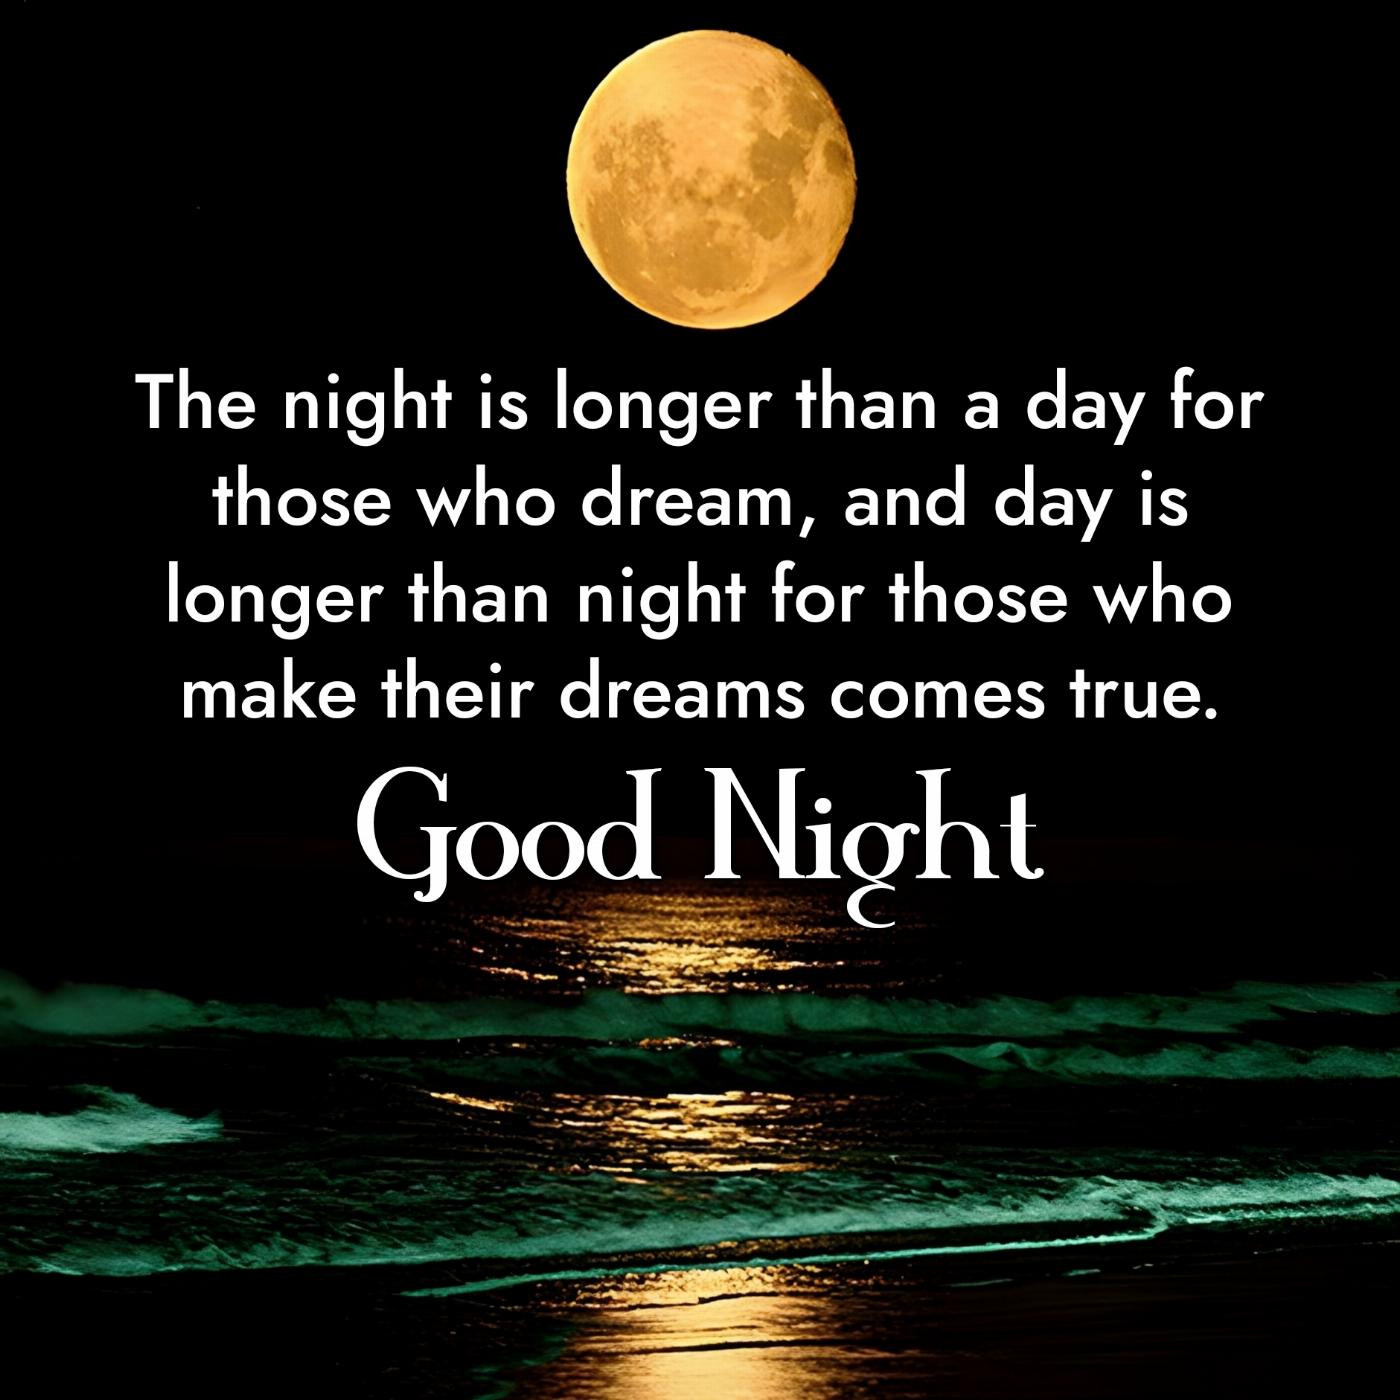 The night is longer than a day for those who dream